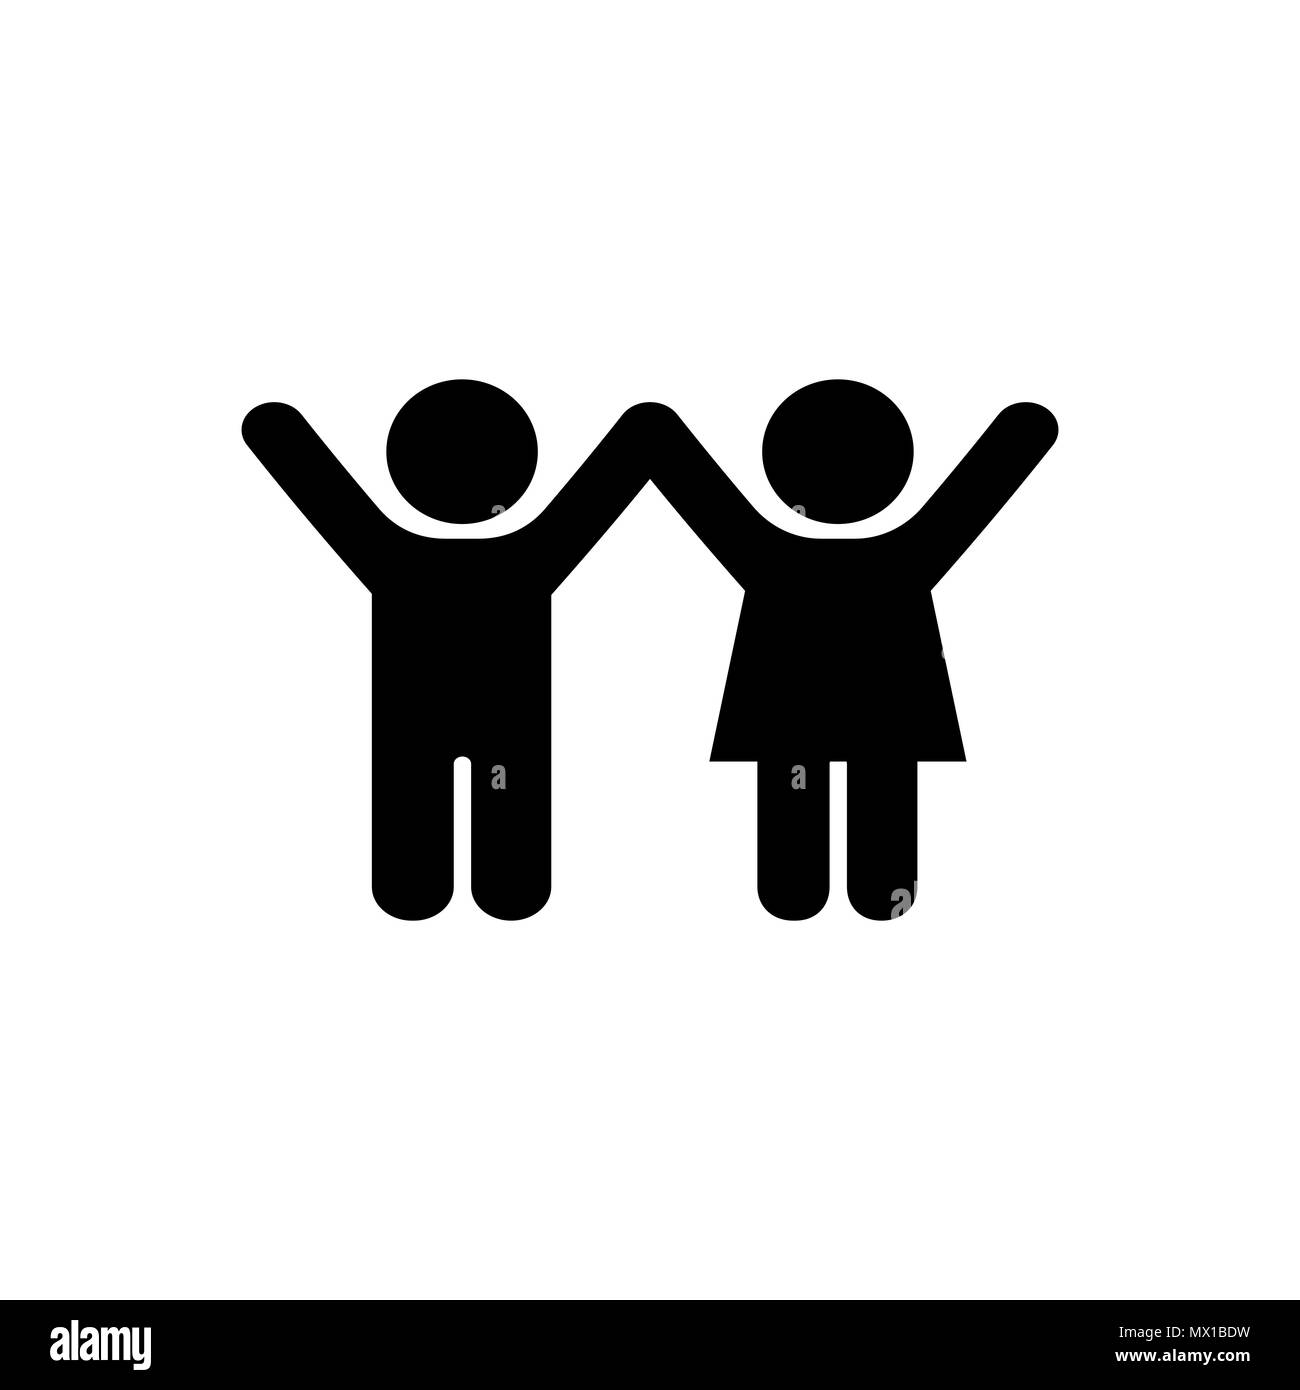 Boy and girl icon icon in flat style. Child symbol Stock Vector